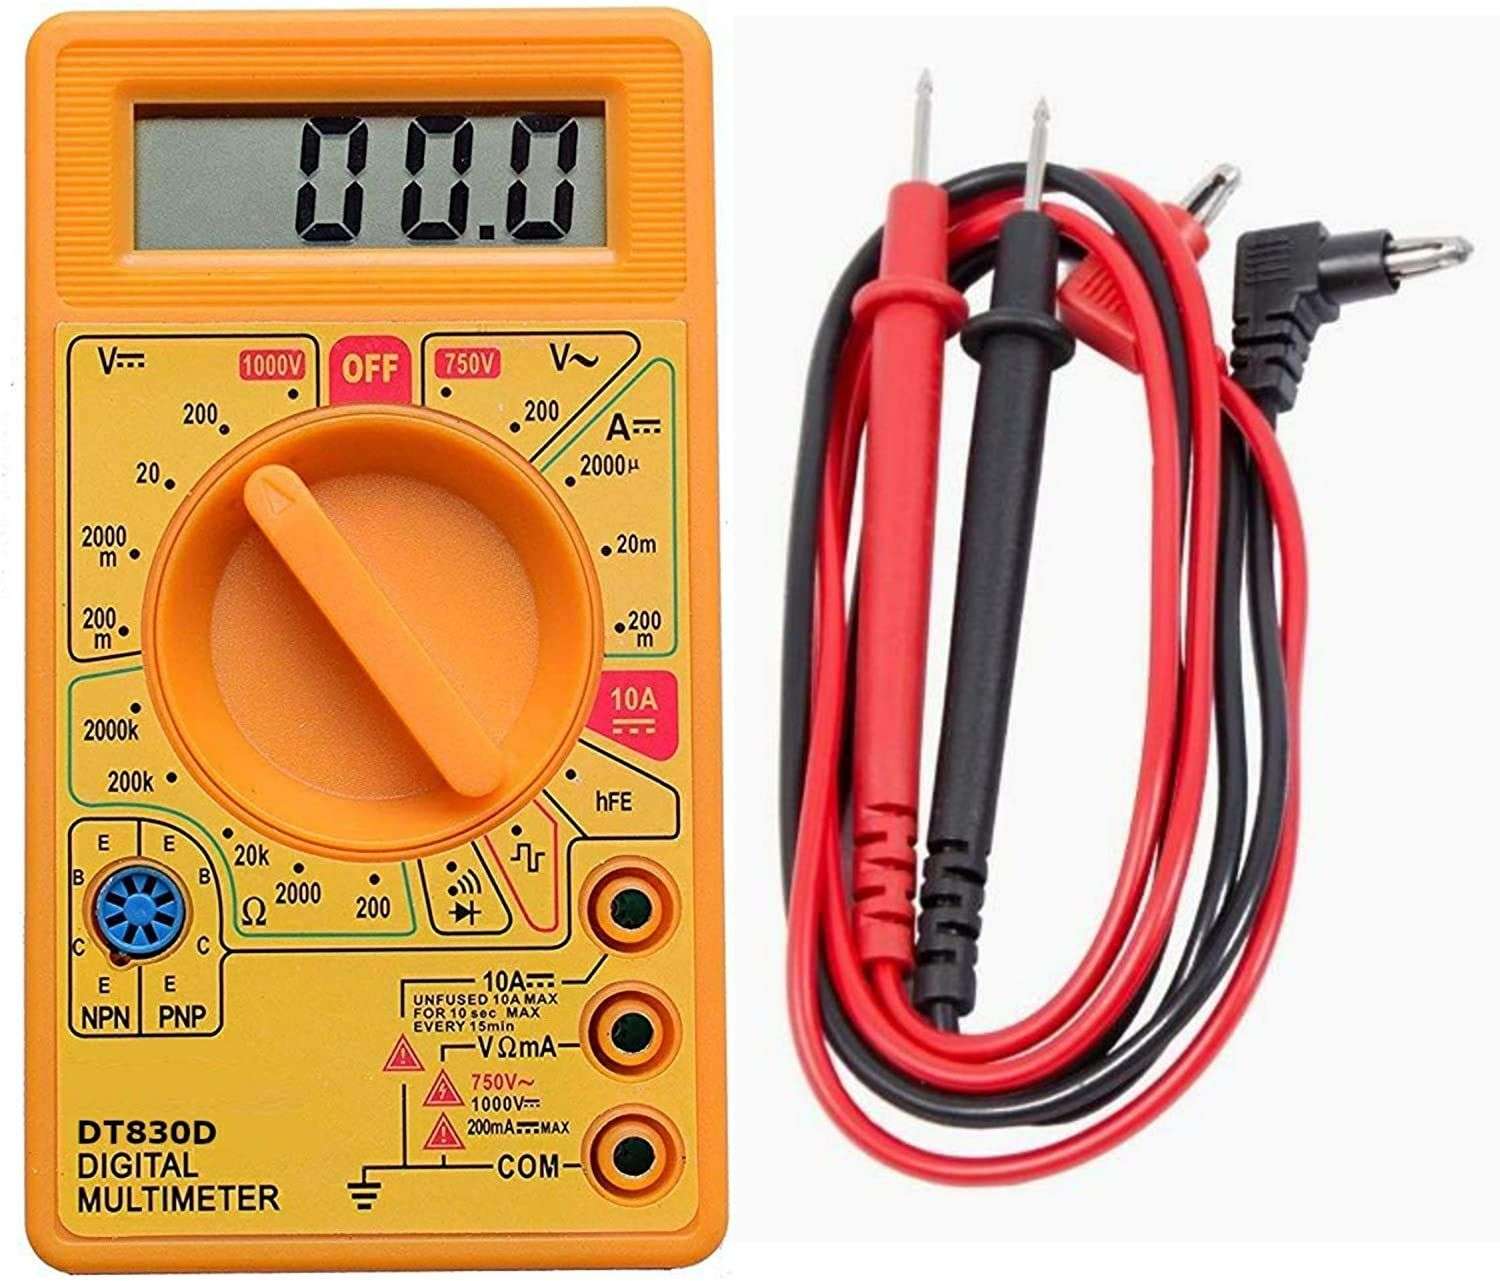 ANENG SZ305 1000VDC,750VAC 2000COUNTS MULTIMETER,made in china